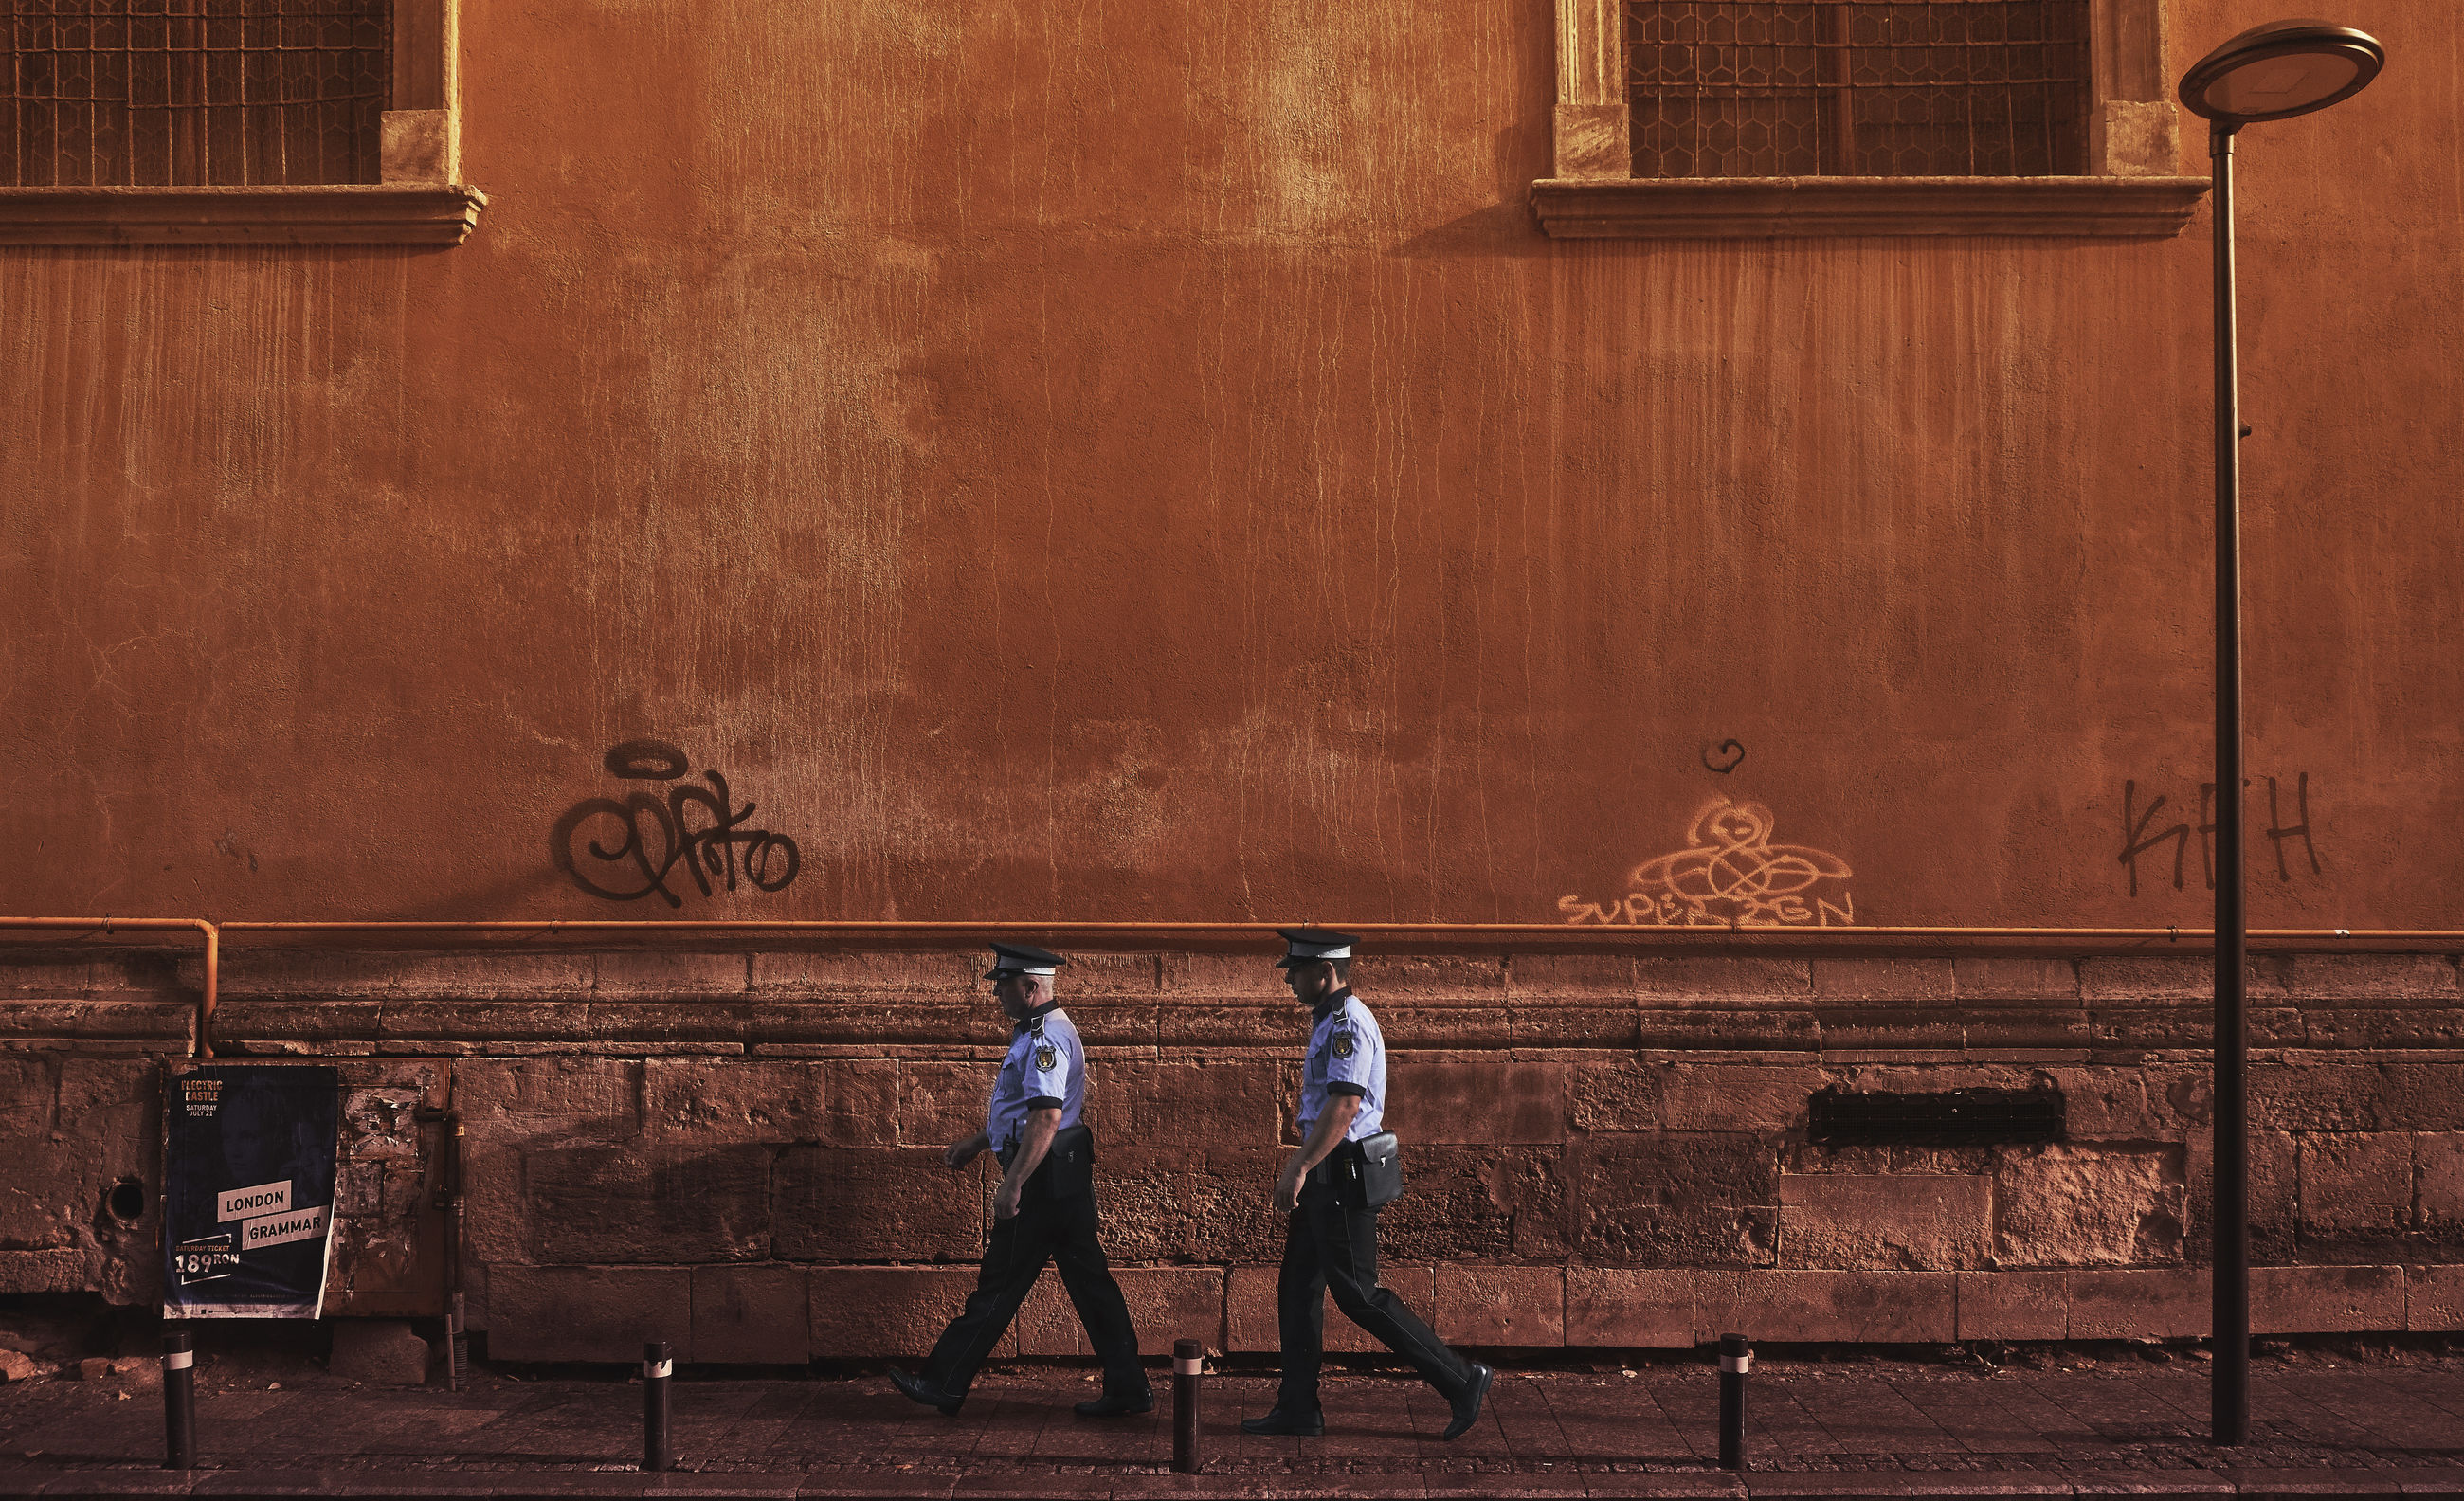 REAR VIEW OF TWO PEOPLE WALKING ON WALL